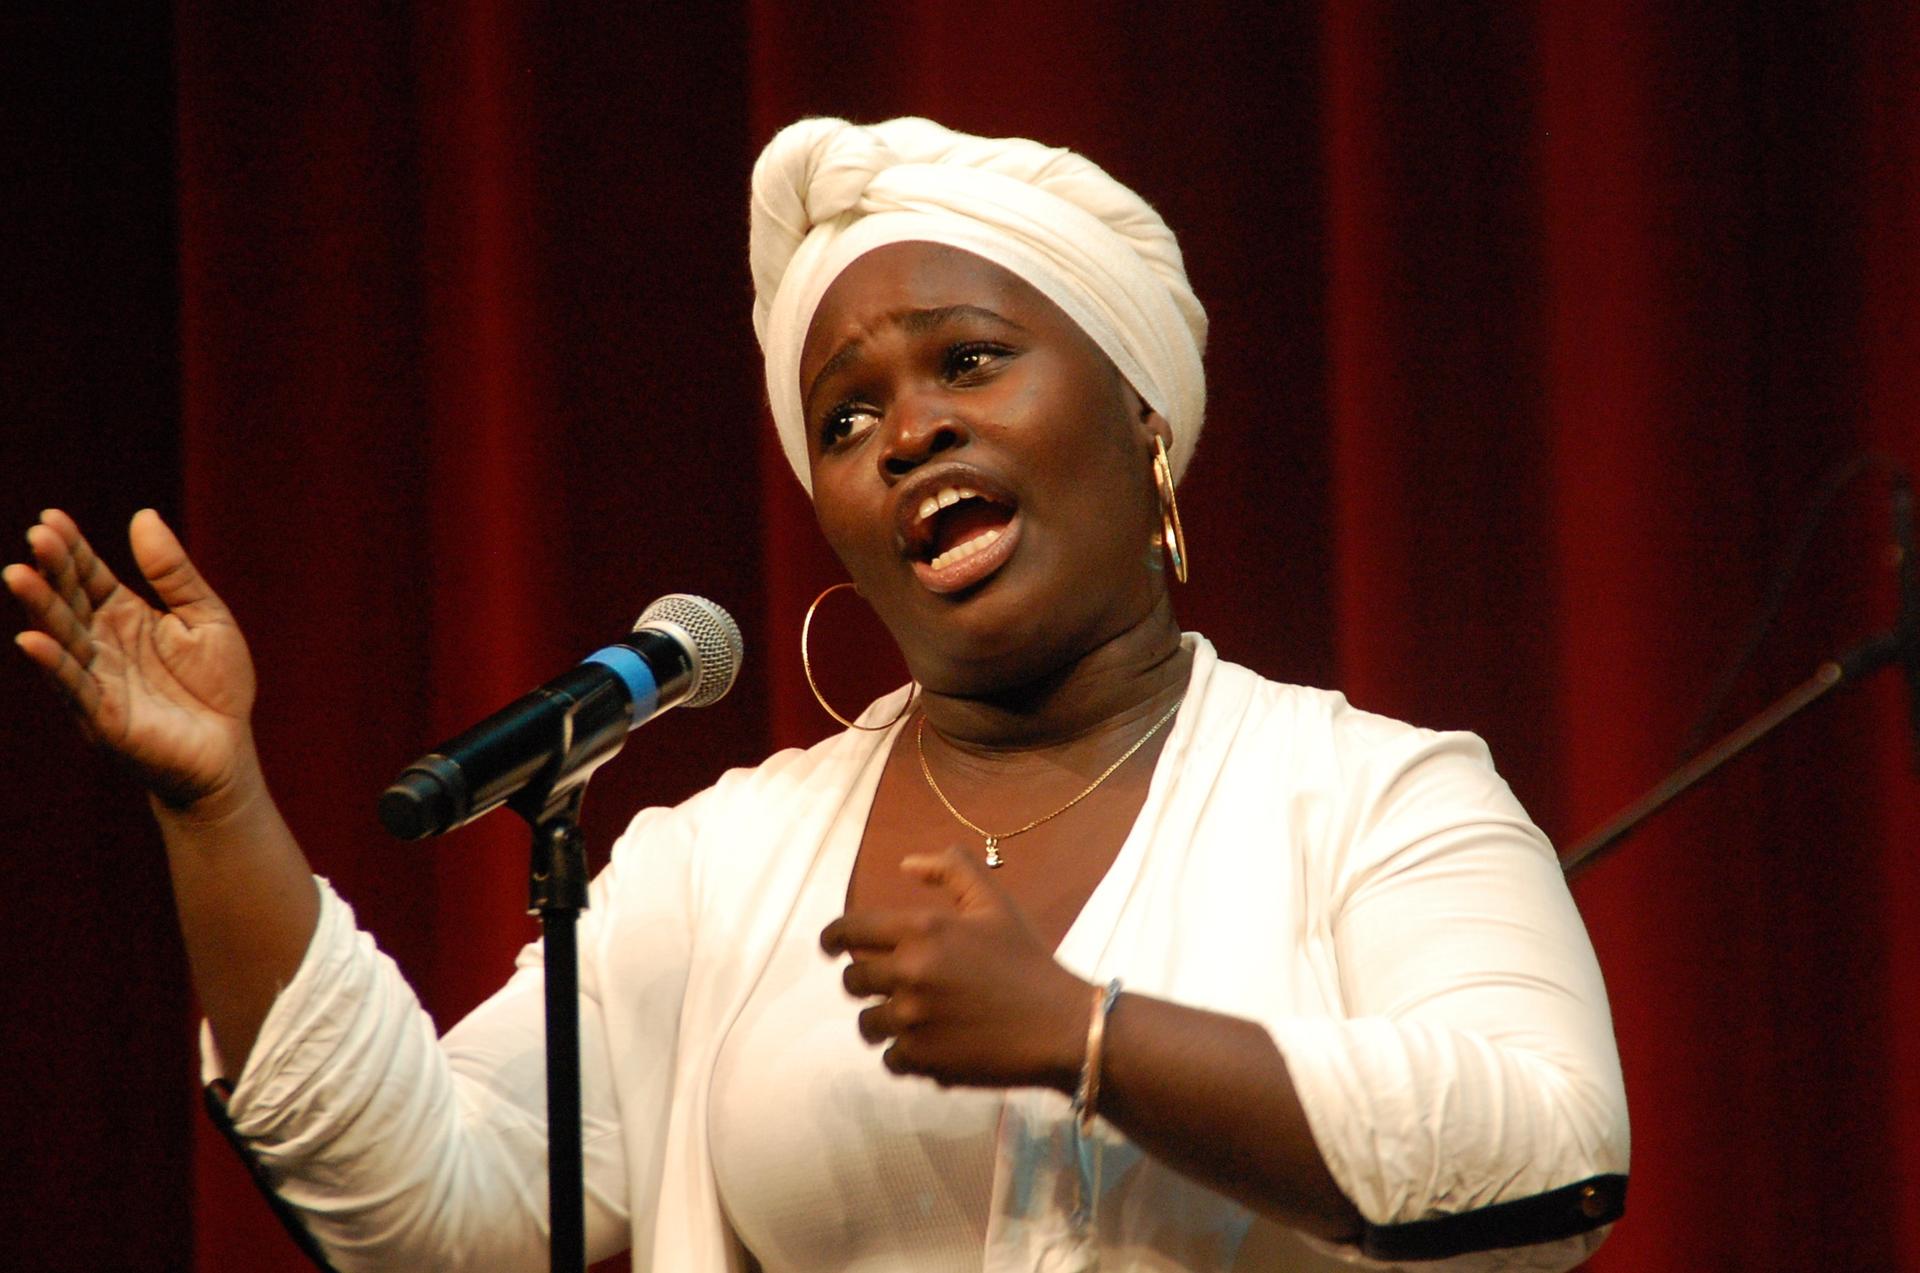 Daymé Arocena is a rising 22 year old singer from Cuba